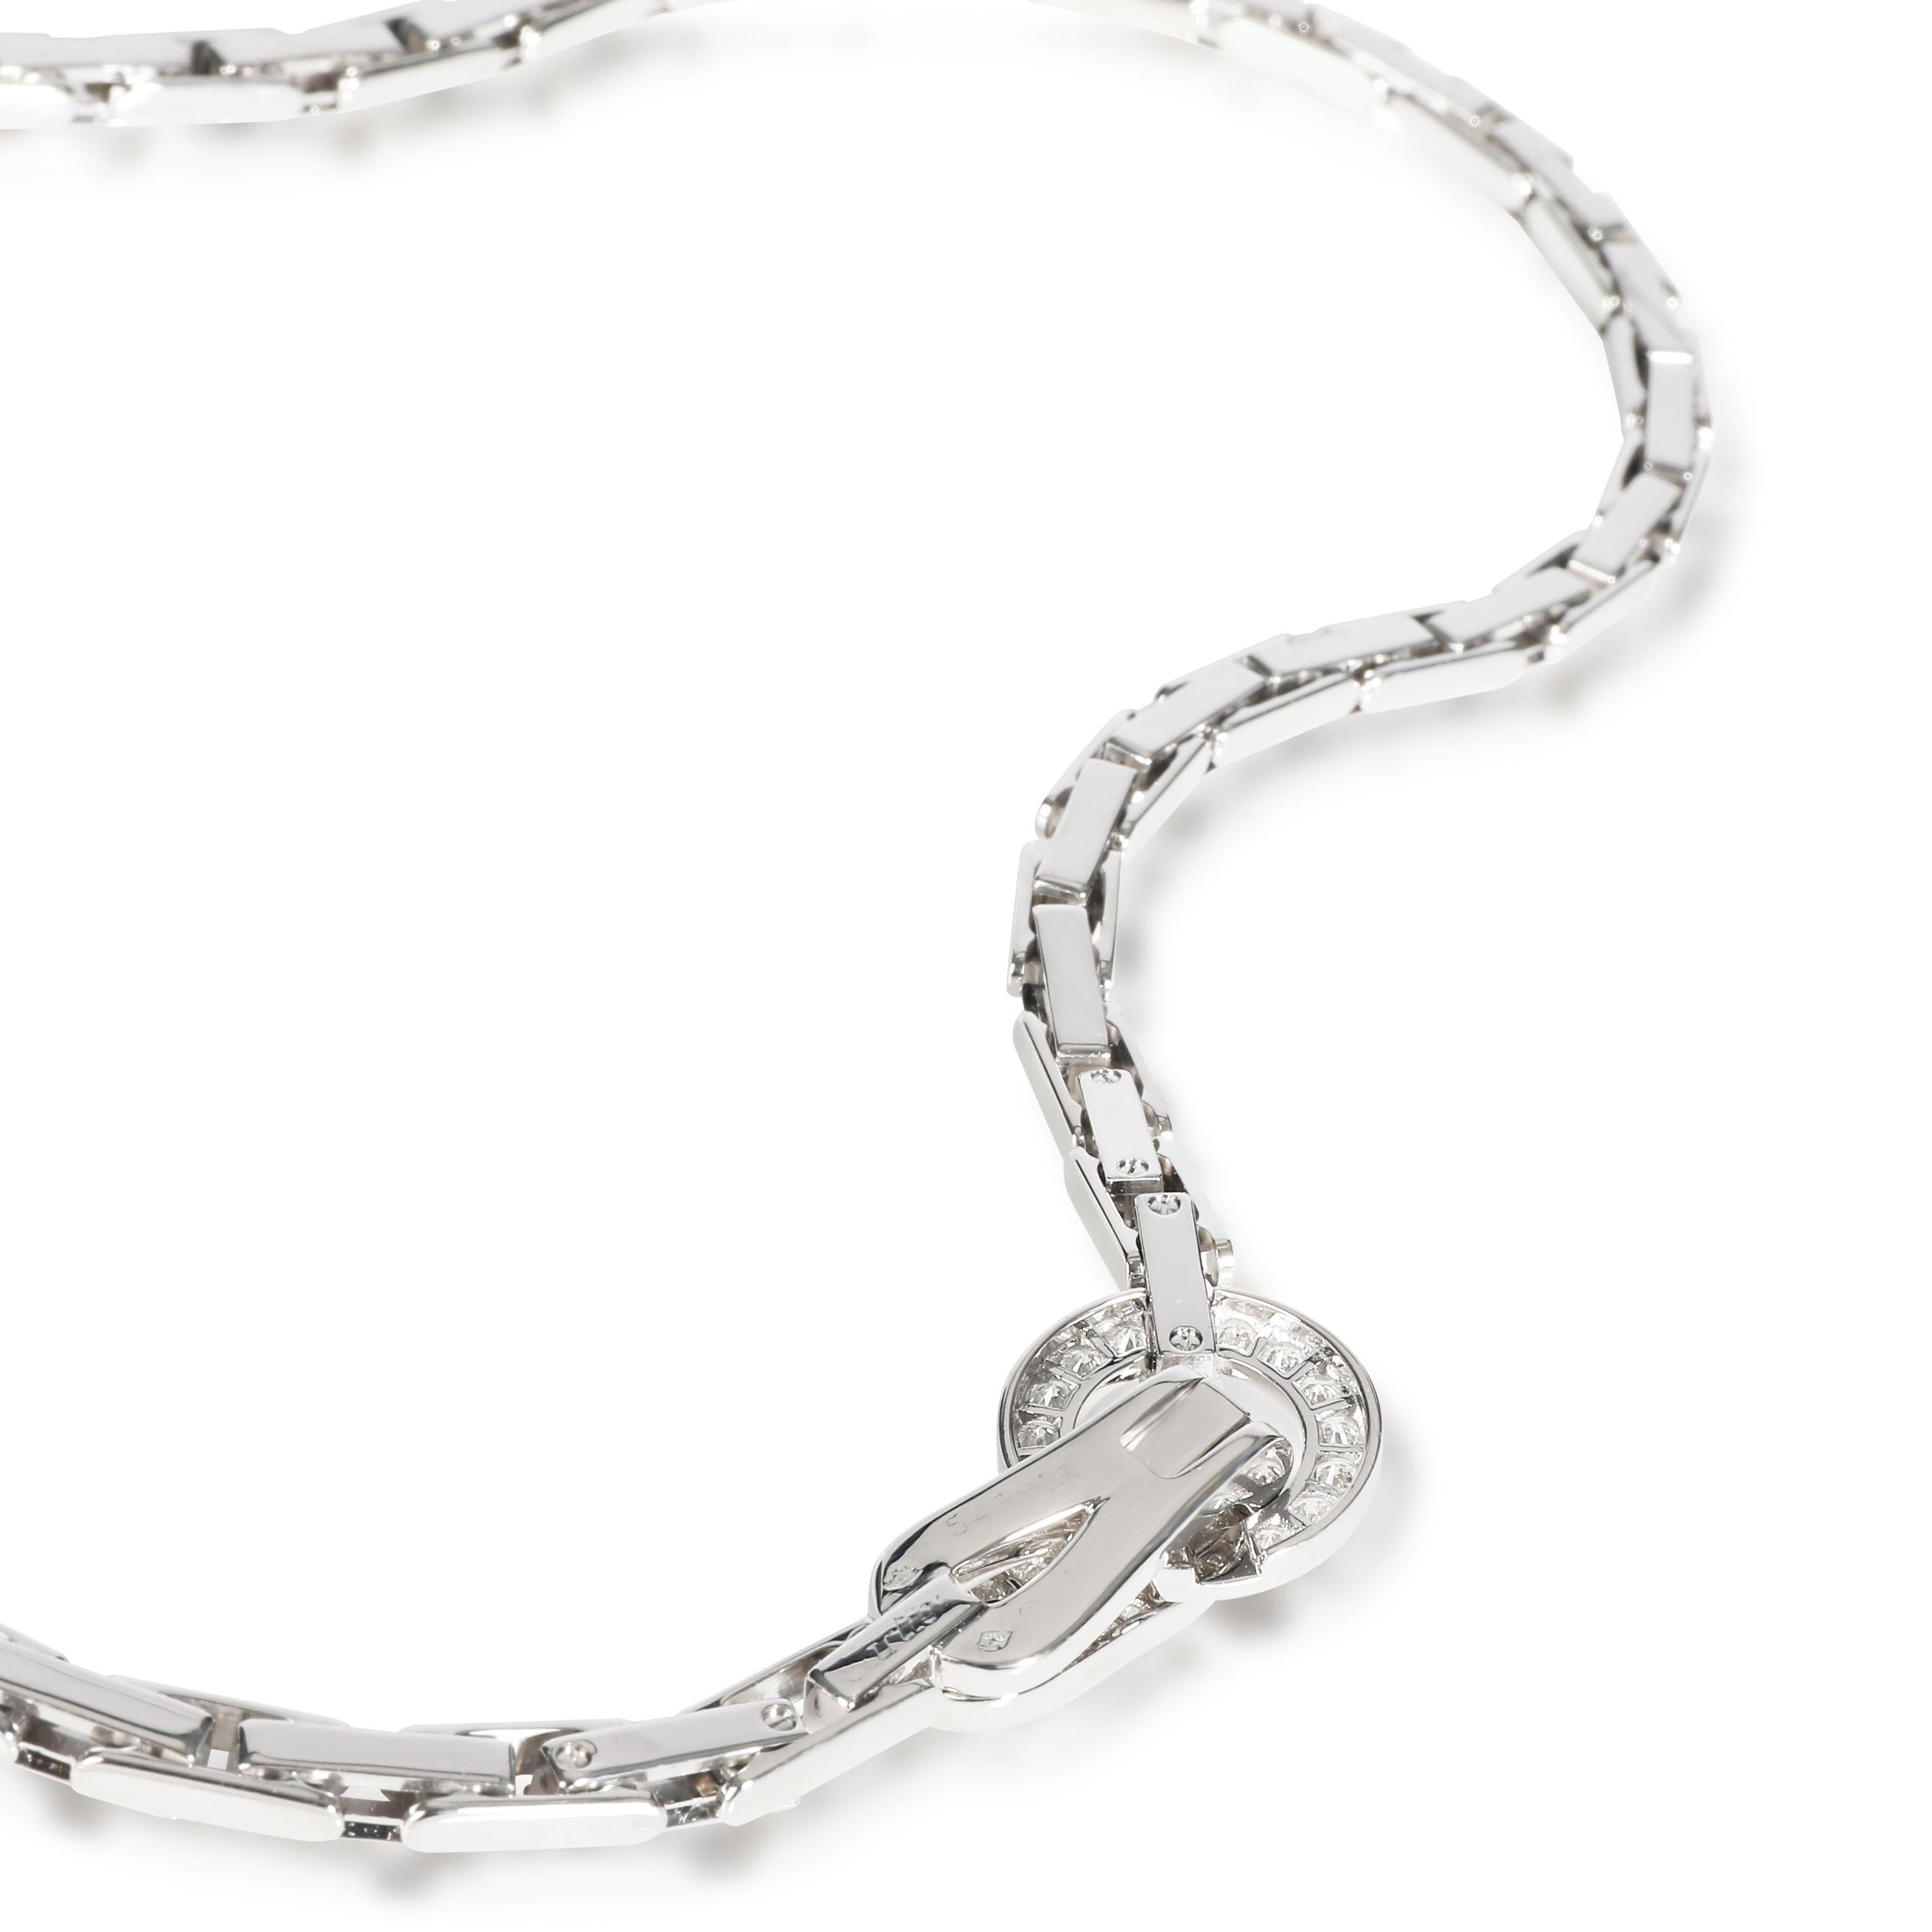 Modern Cartier Agrafe Diamond Necklace in 18k White Gold 1.10 CTW